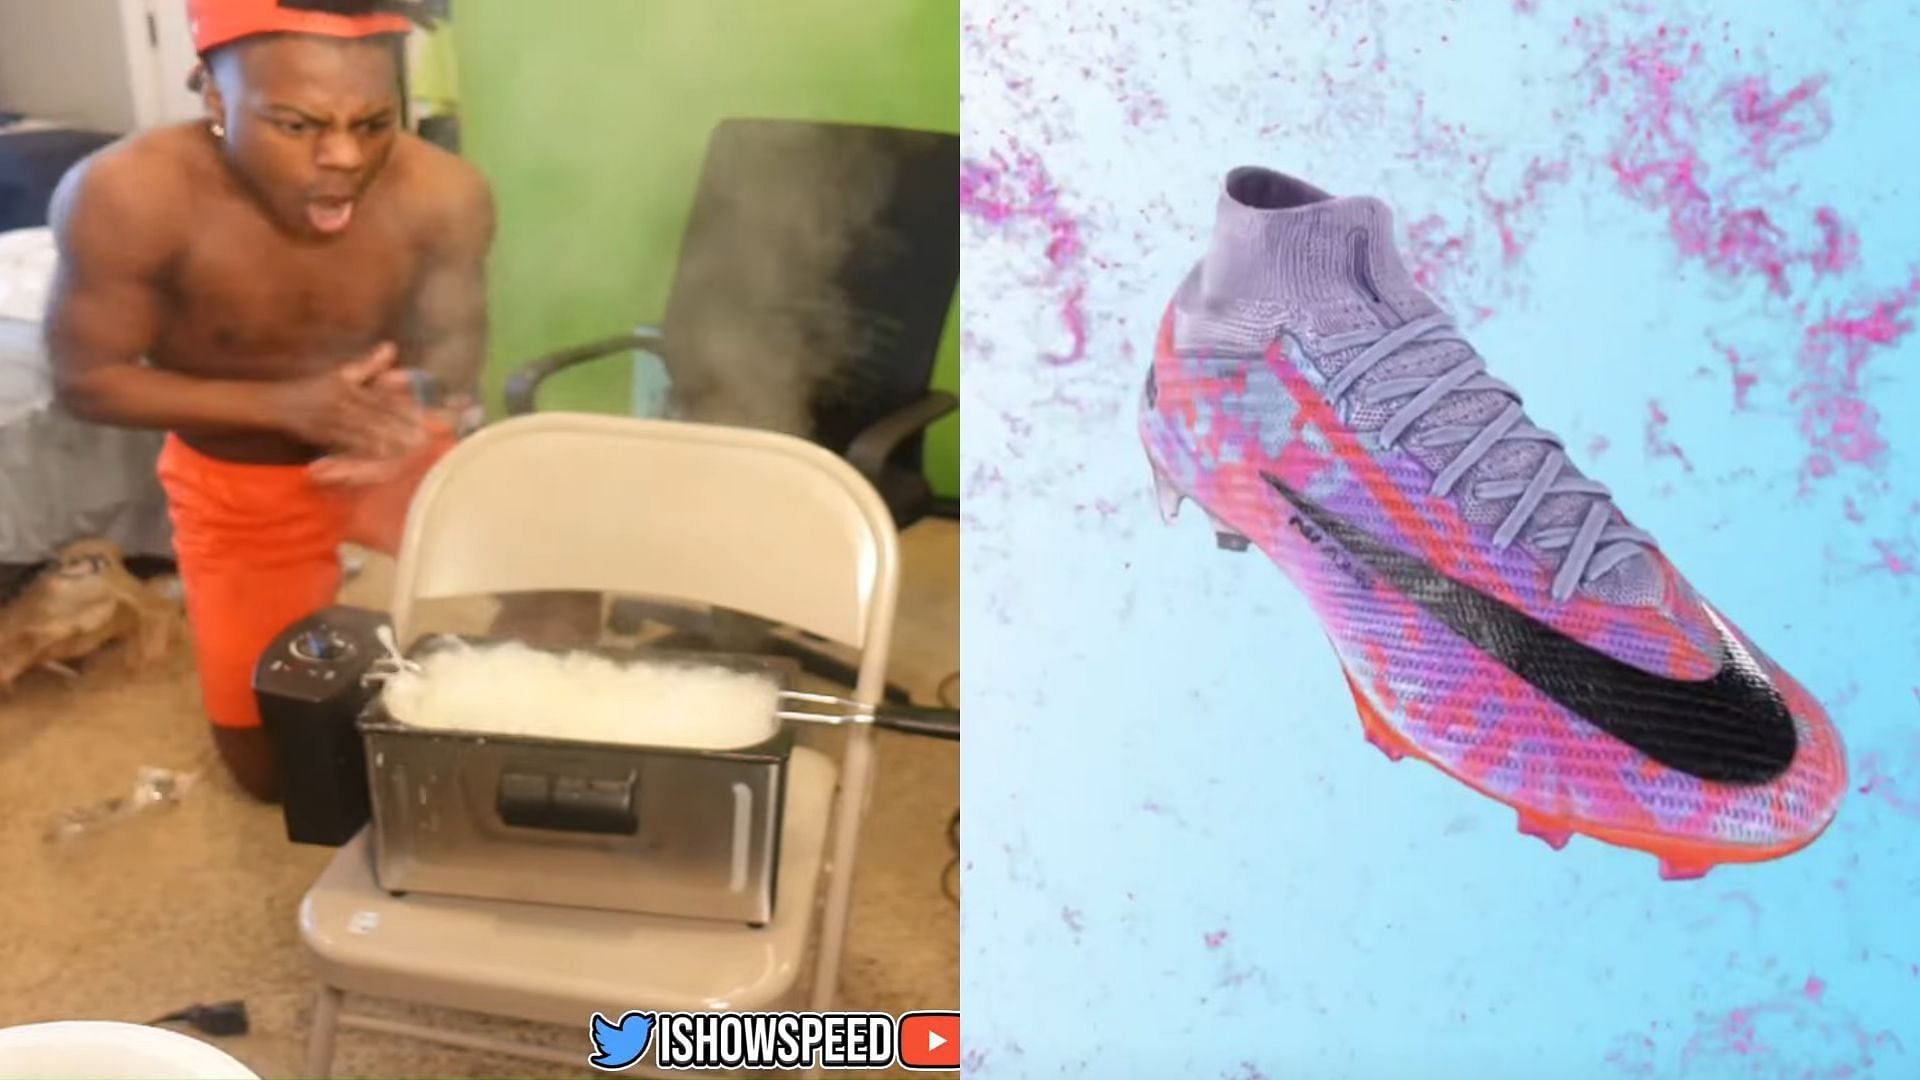 IShowSpeed narrowly avoids accident in the same stream where gets the new Cristiano Ronaldo boots (Image via Sportskeeda)